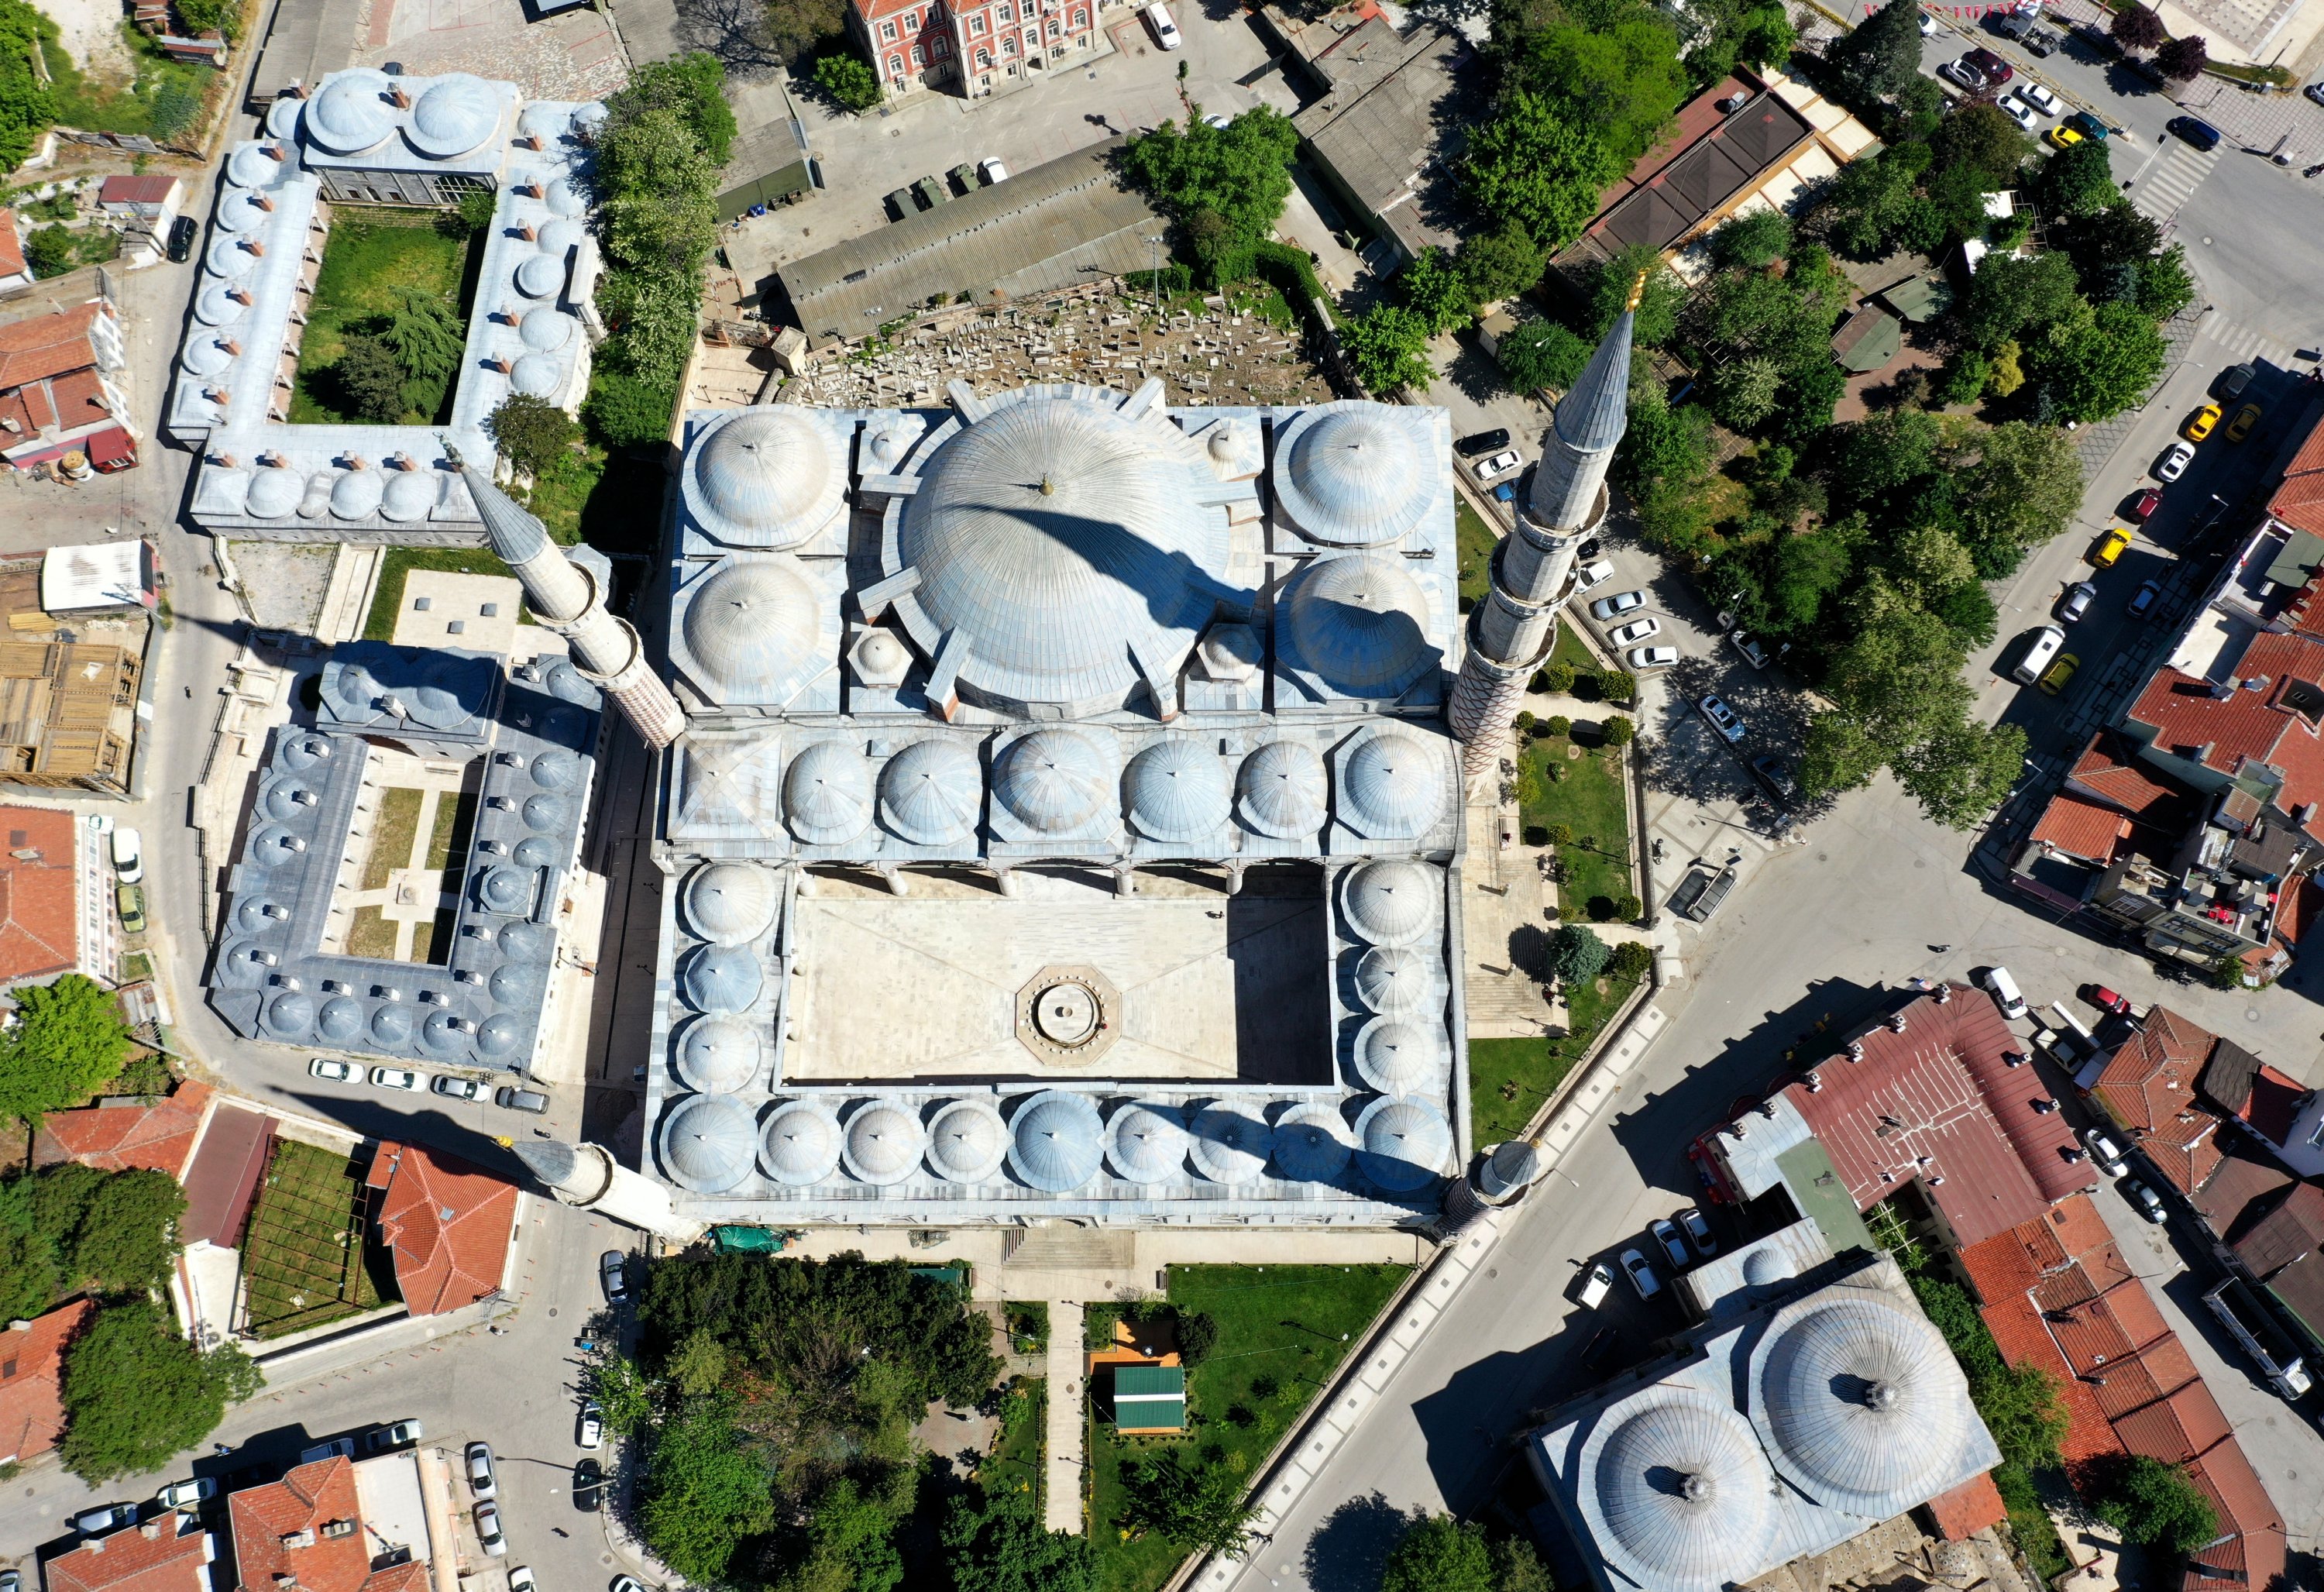 An aerial view shows the Üç Şerefeli Mosque (the Mosque with Three Balconies) and its surrounding area, including its famous minaret with three balconies that gives the mosque its name, Edirne, Turkey, May 11, 2021. (AA Photo)